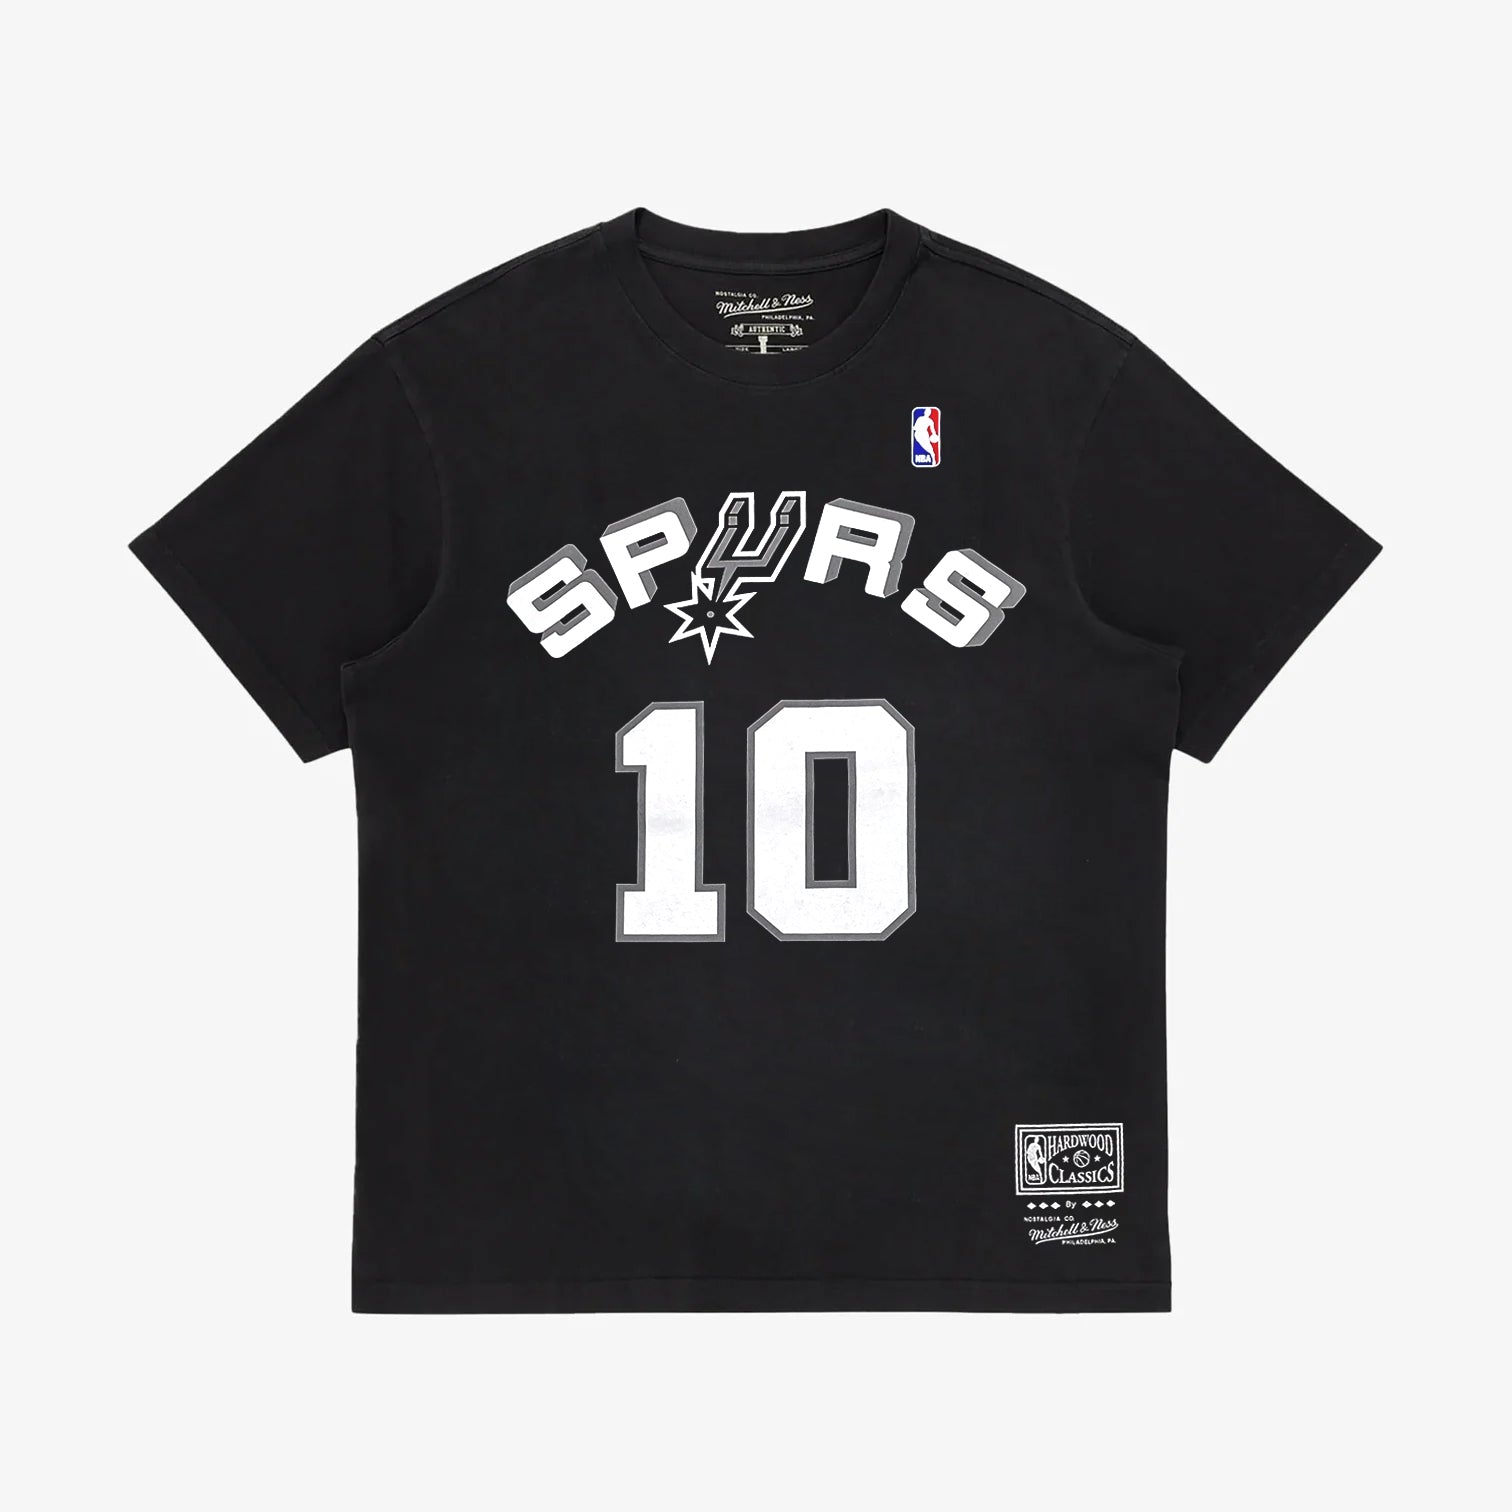 San Antonio Spurs Official NBA Apparel Infant Toddler Size T-Shirt New with  Tags